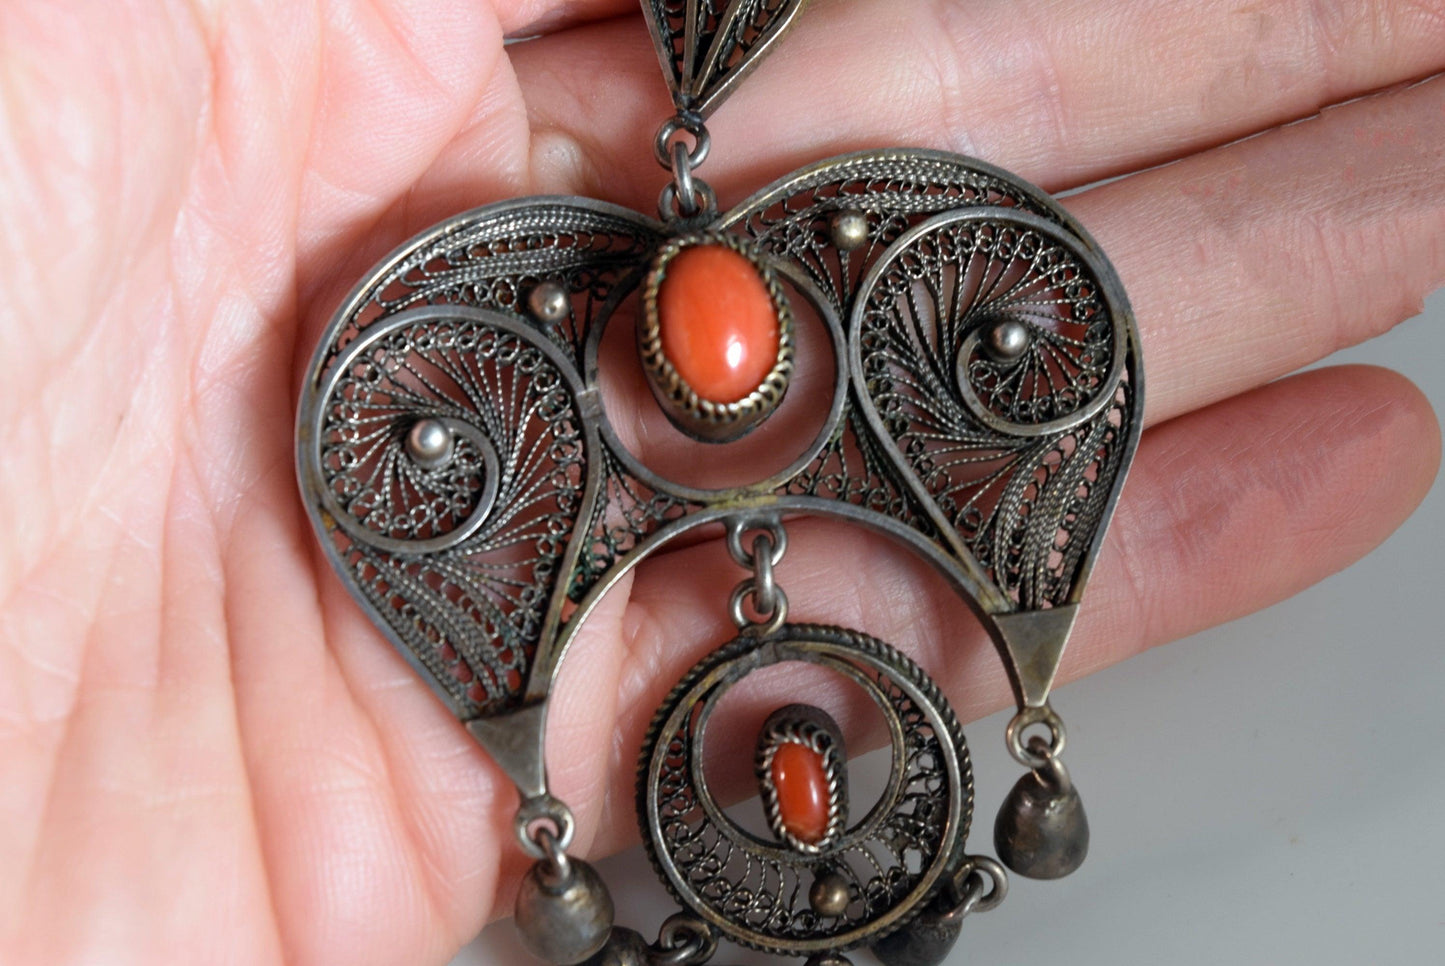 Vintage Egyptian Coral and Silver Filigree Necklace - Anteeka